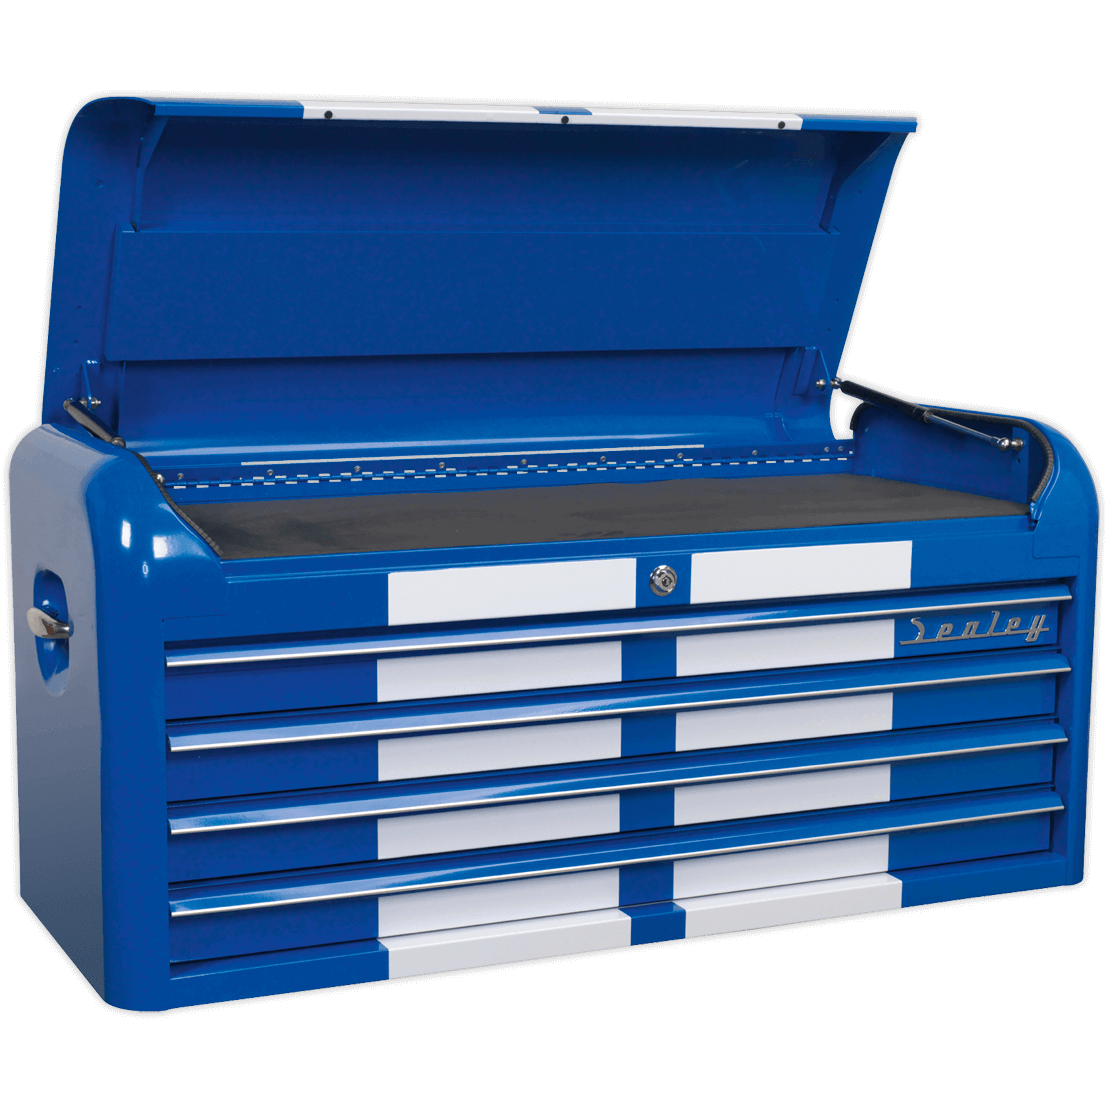 Sealey Premier Retro Style 4 Drawer Wide Top Tool Chest Blue / White